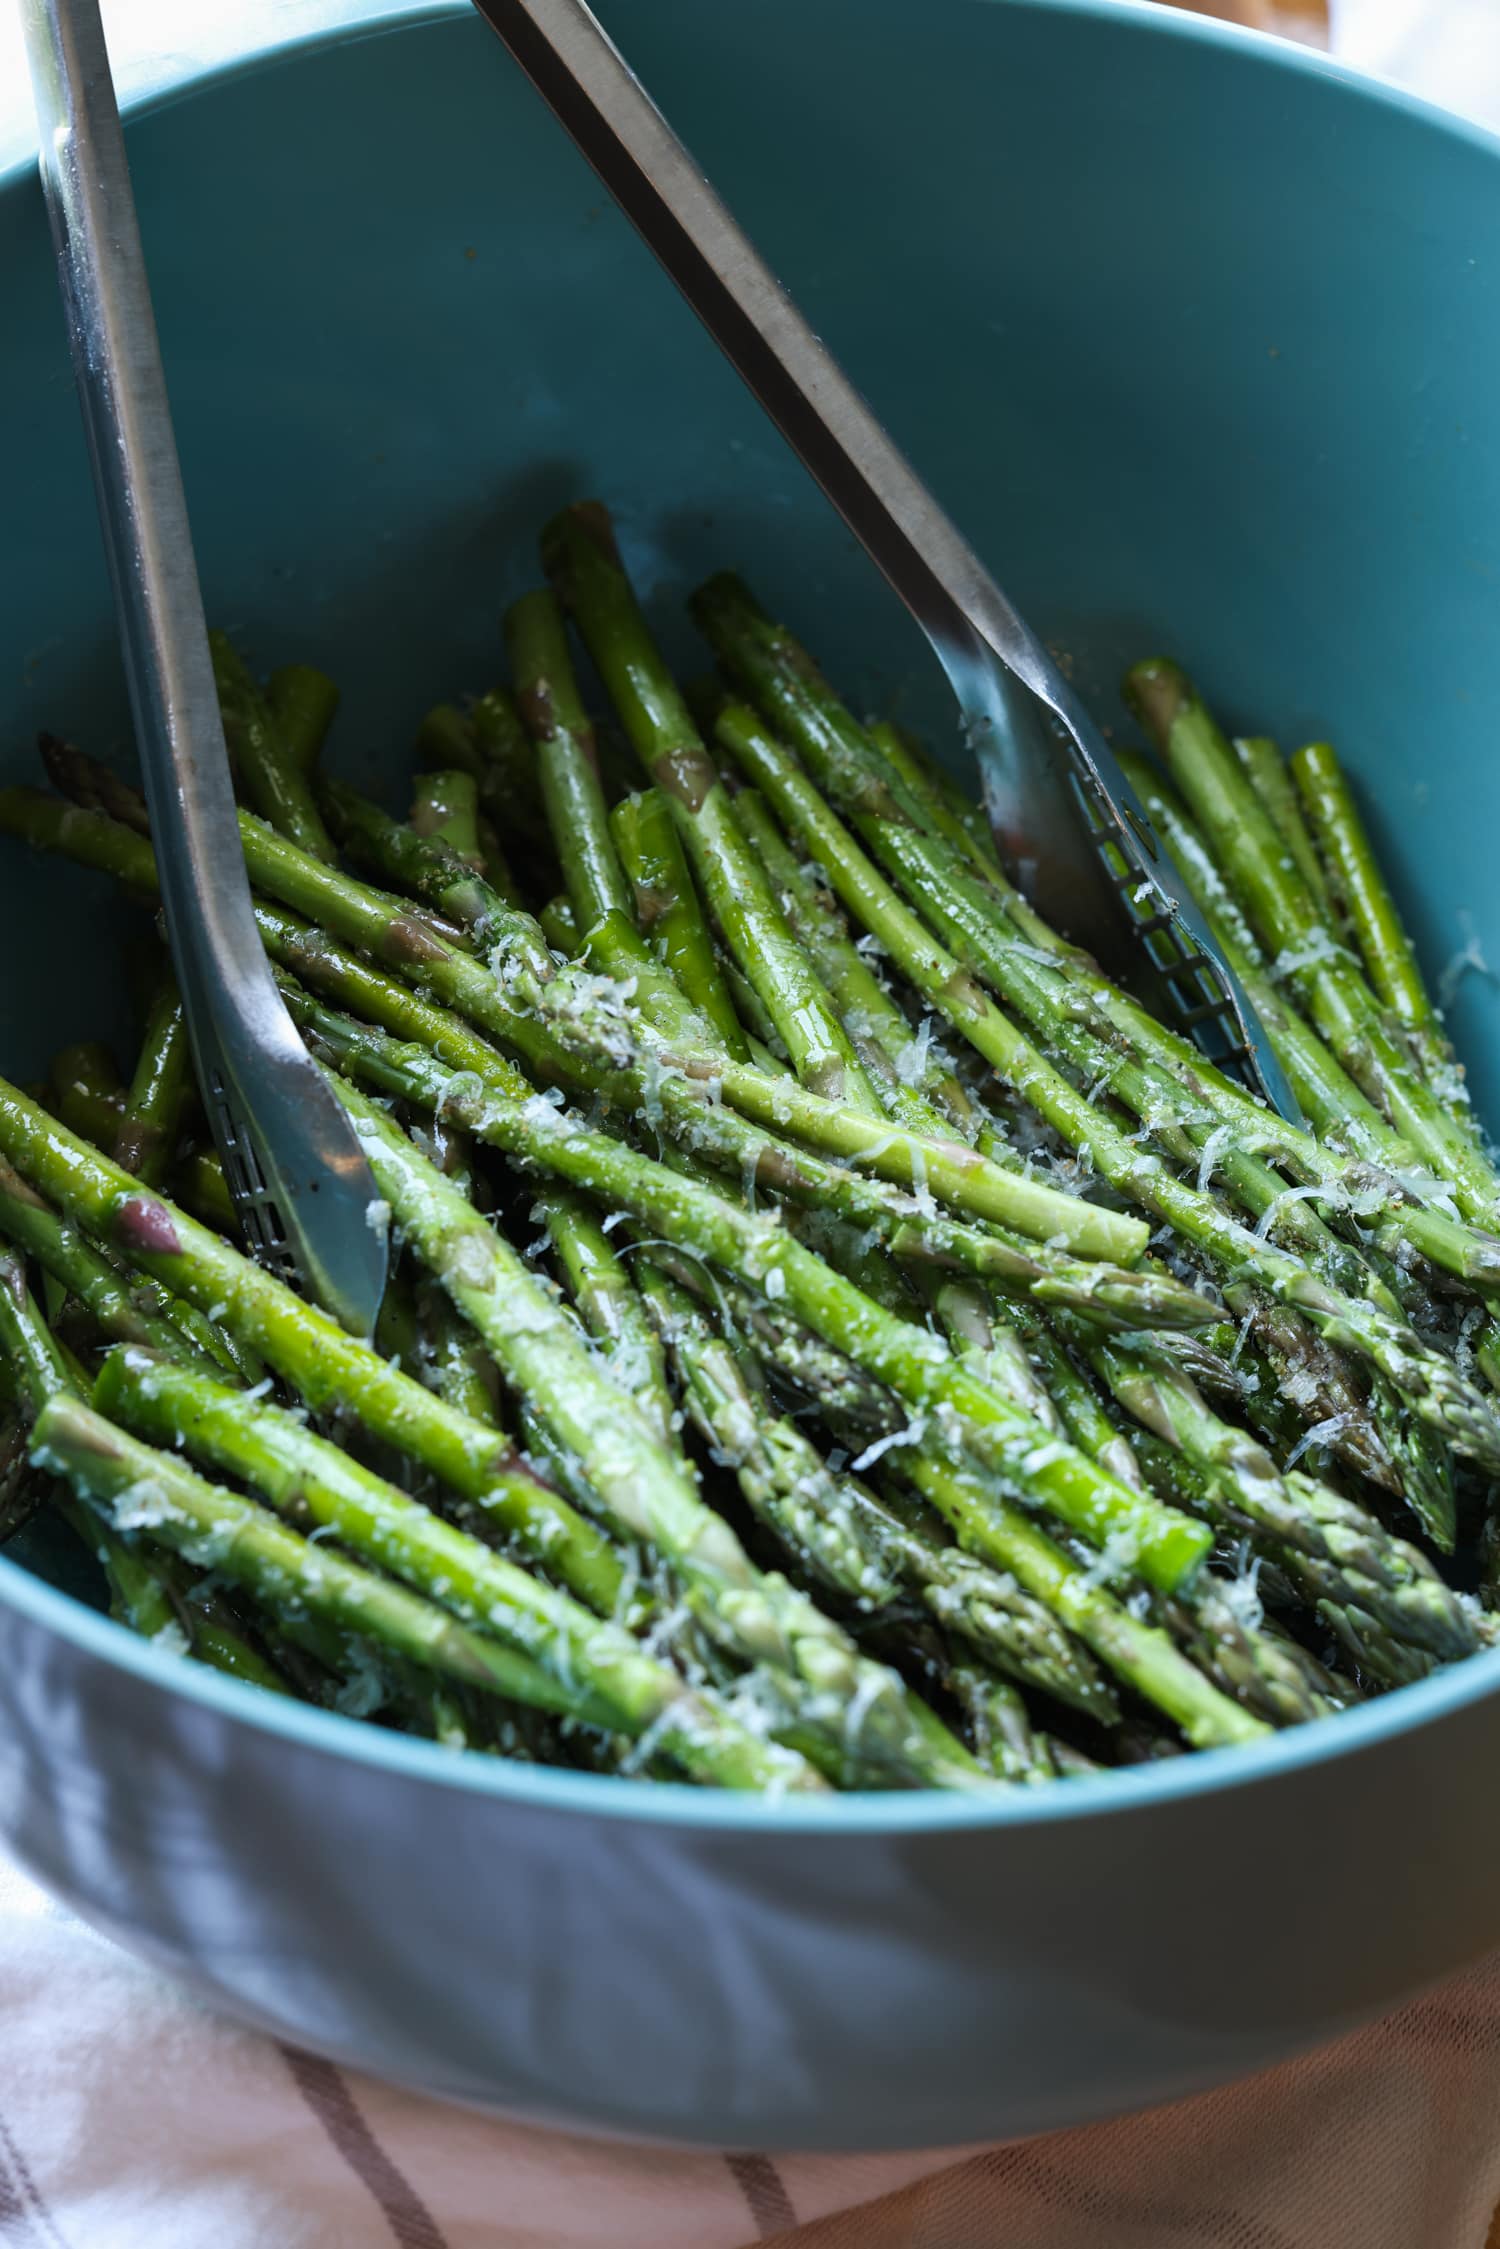 Asparagus spears are tossed with seasonings in a large blue bowl with metal tongs.